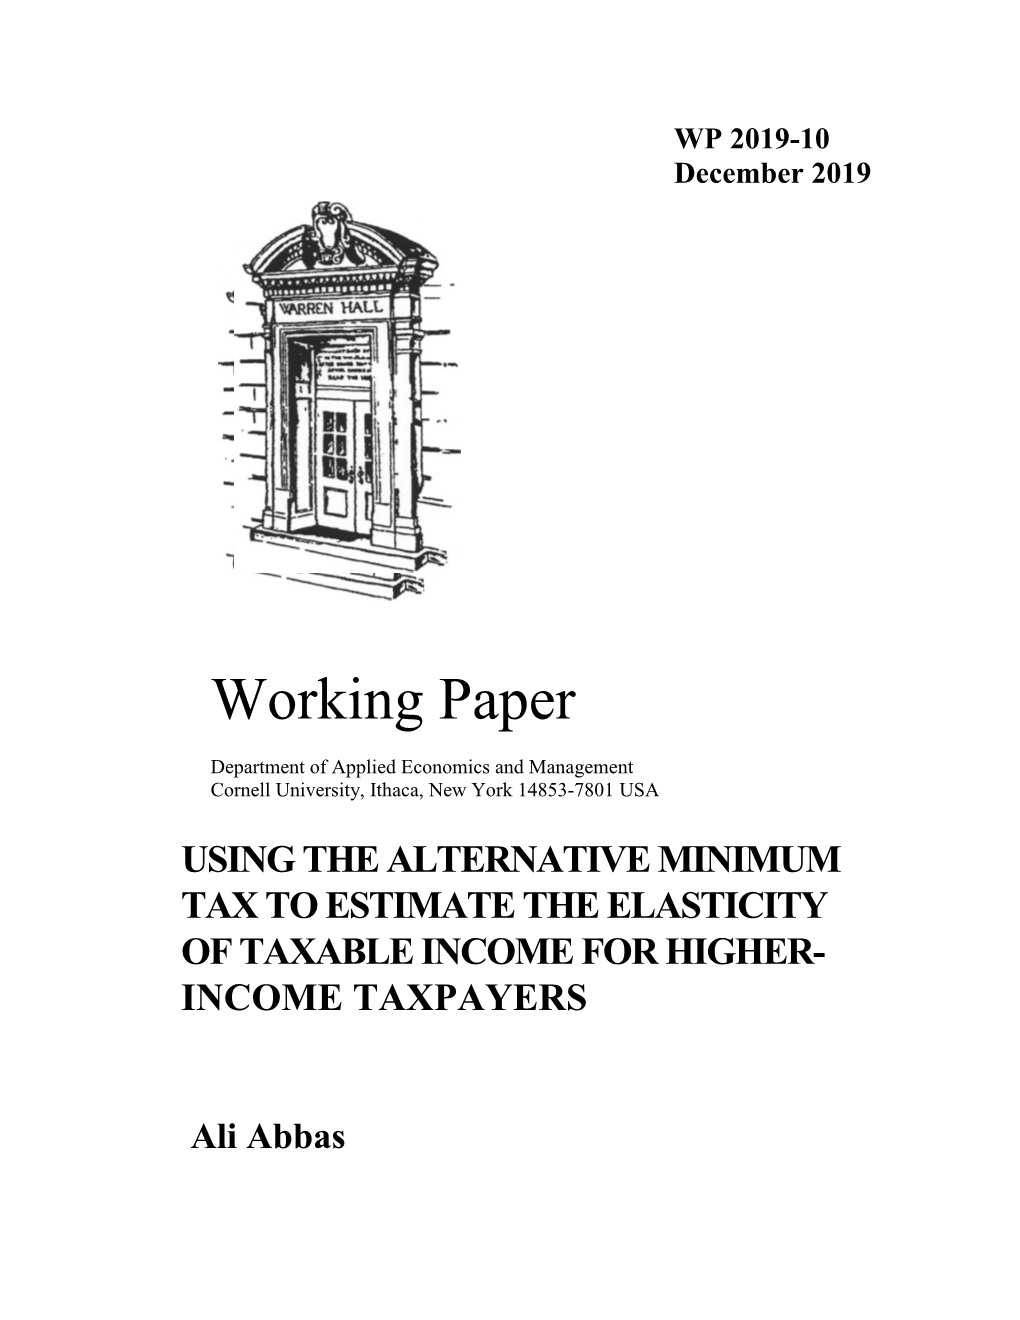 USING the ALTERNATIVE MINIMUM TAX to ESTIMATE the ELASTICITY of TAXABLE INCOMEW Orkifor HIGHER-Ng INCOME Taxpayerspaper